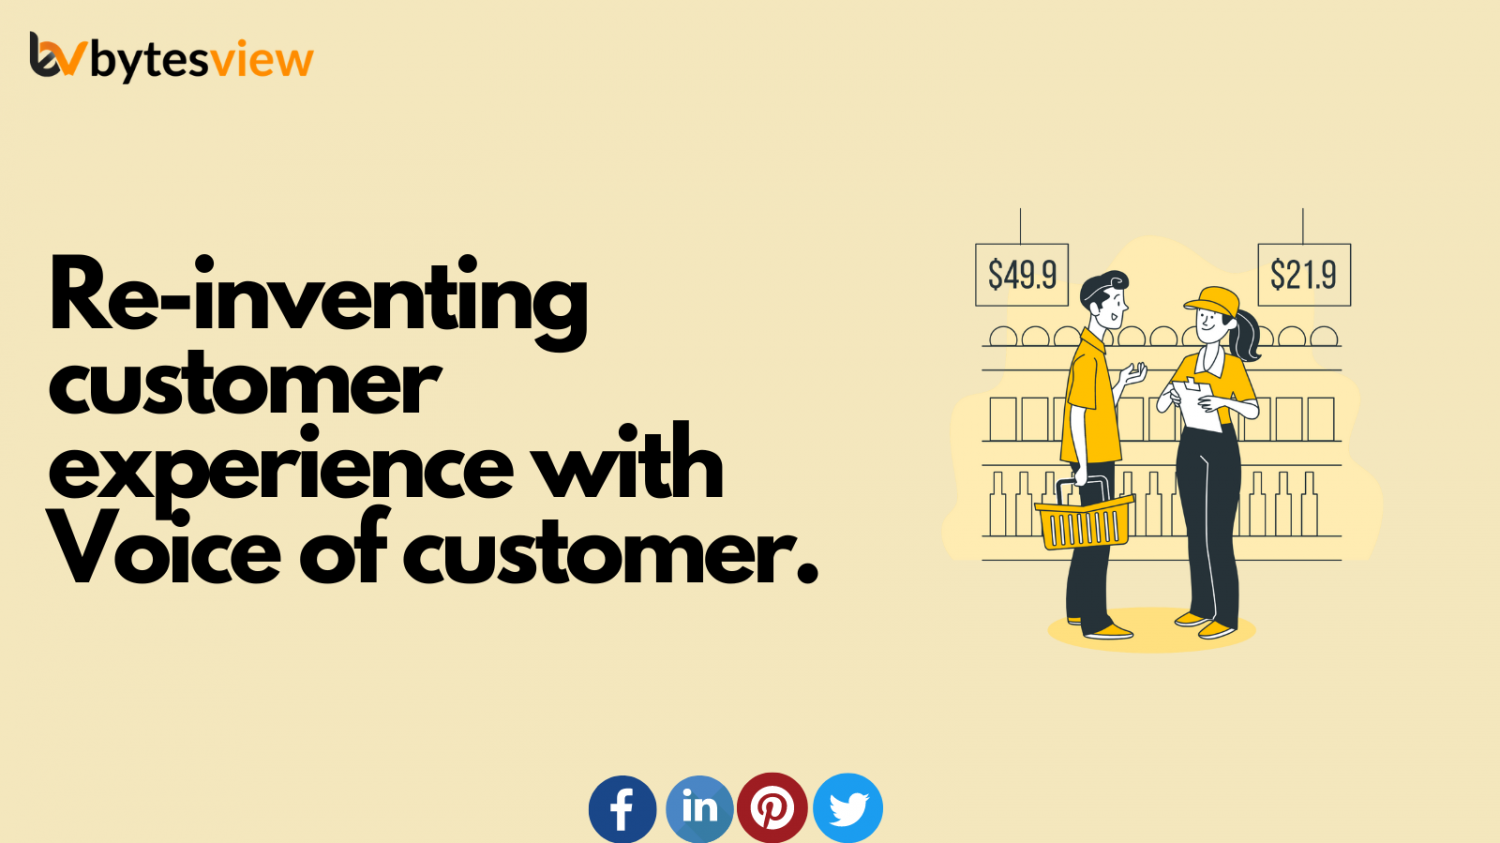 Re-inventing customer experience with voice of customer. Infographic